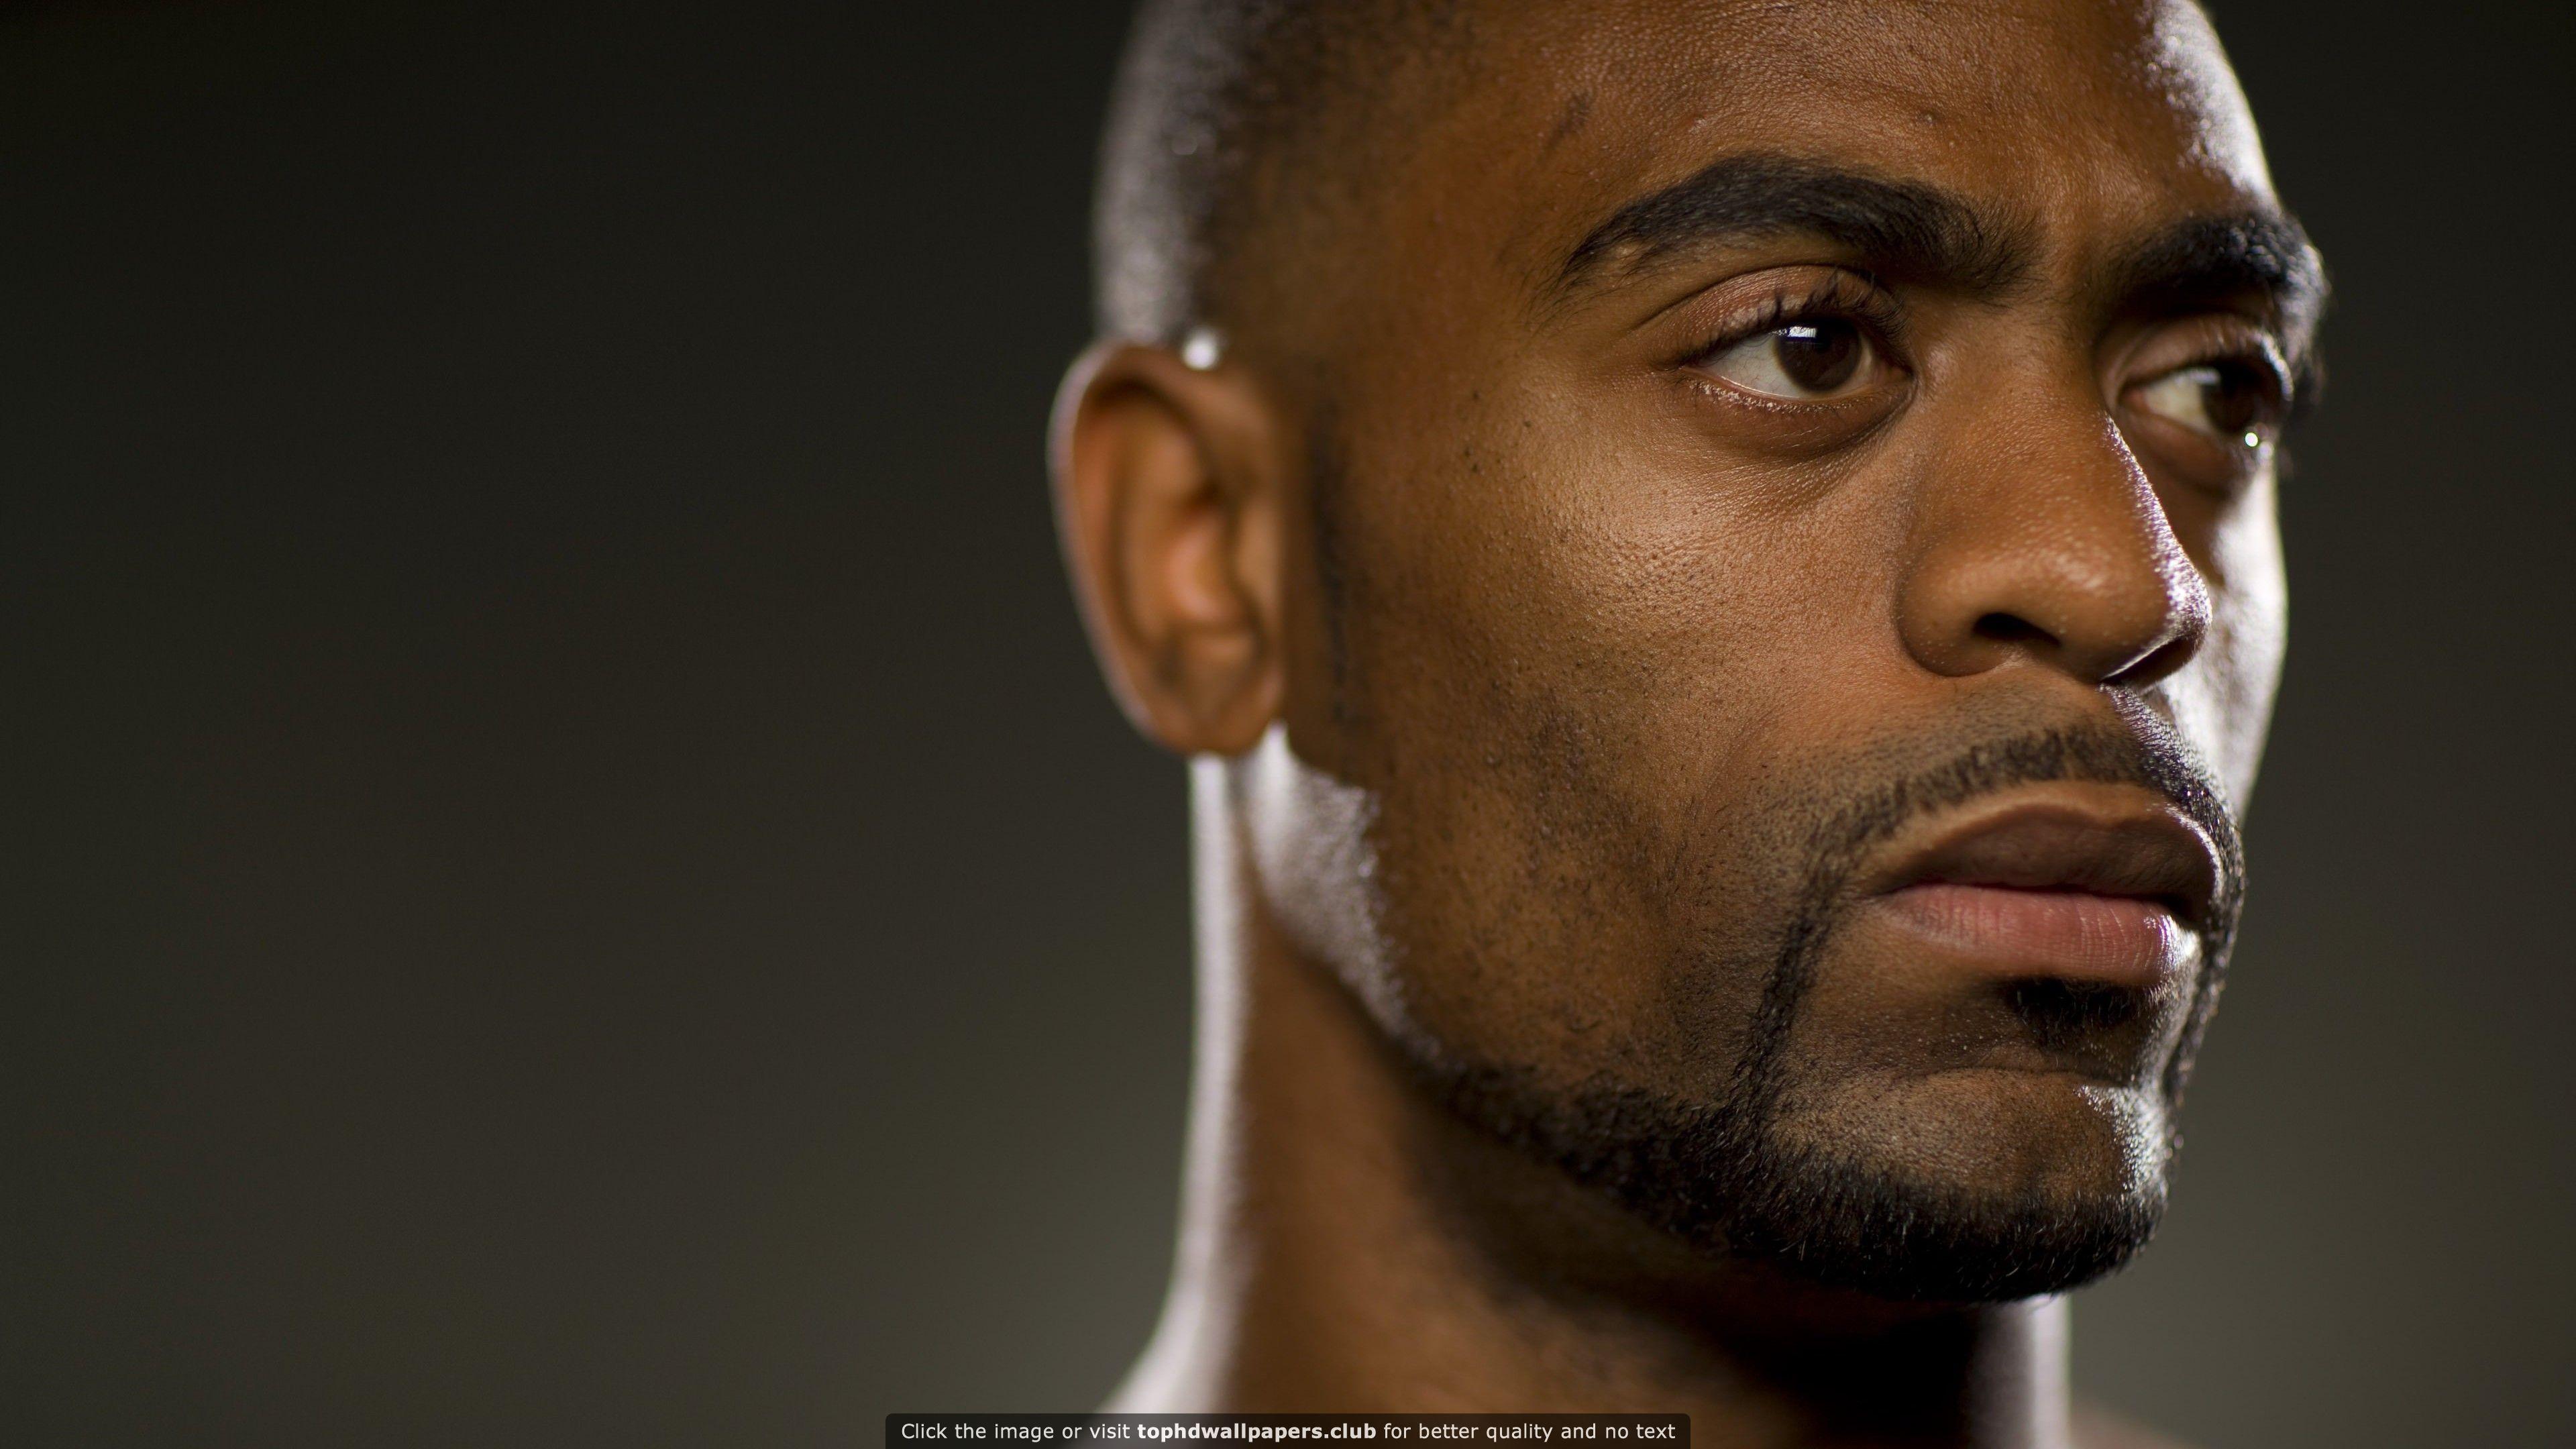 Tyson Gay HD wallpaper for your PC, Mac or Mobile device. Desktop